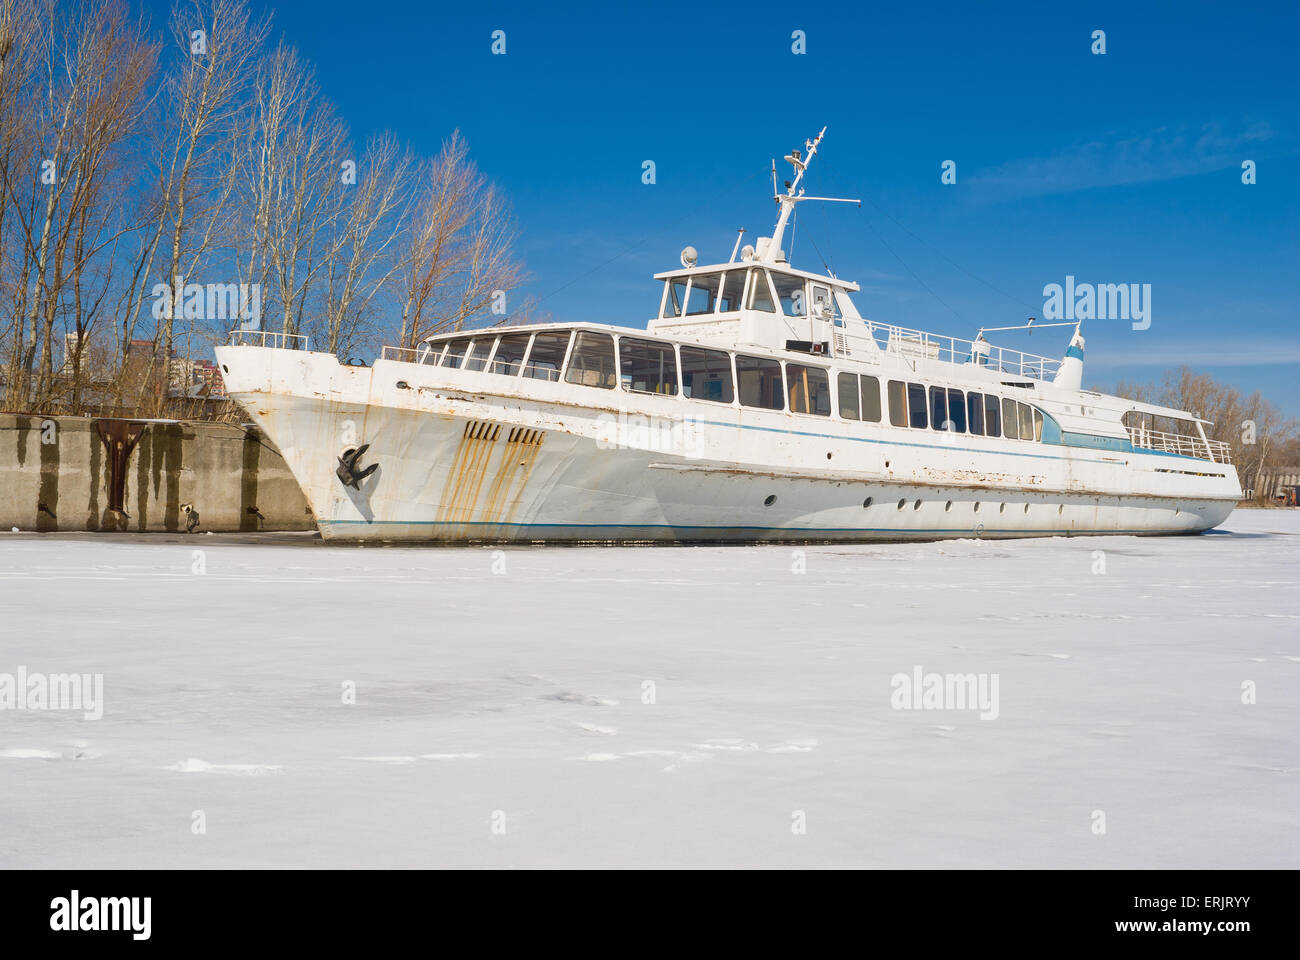 An old pleasure boat iced-bound on a winter berthing. Stock Photo